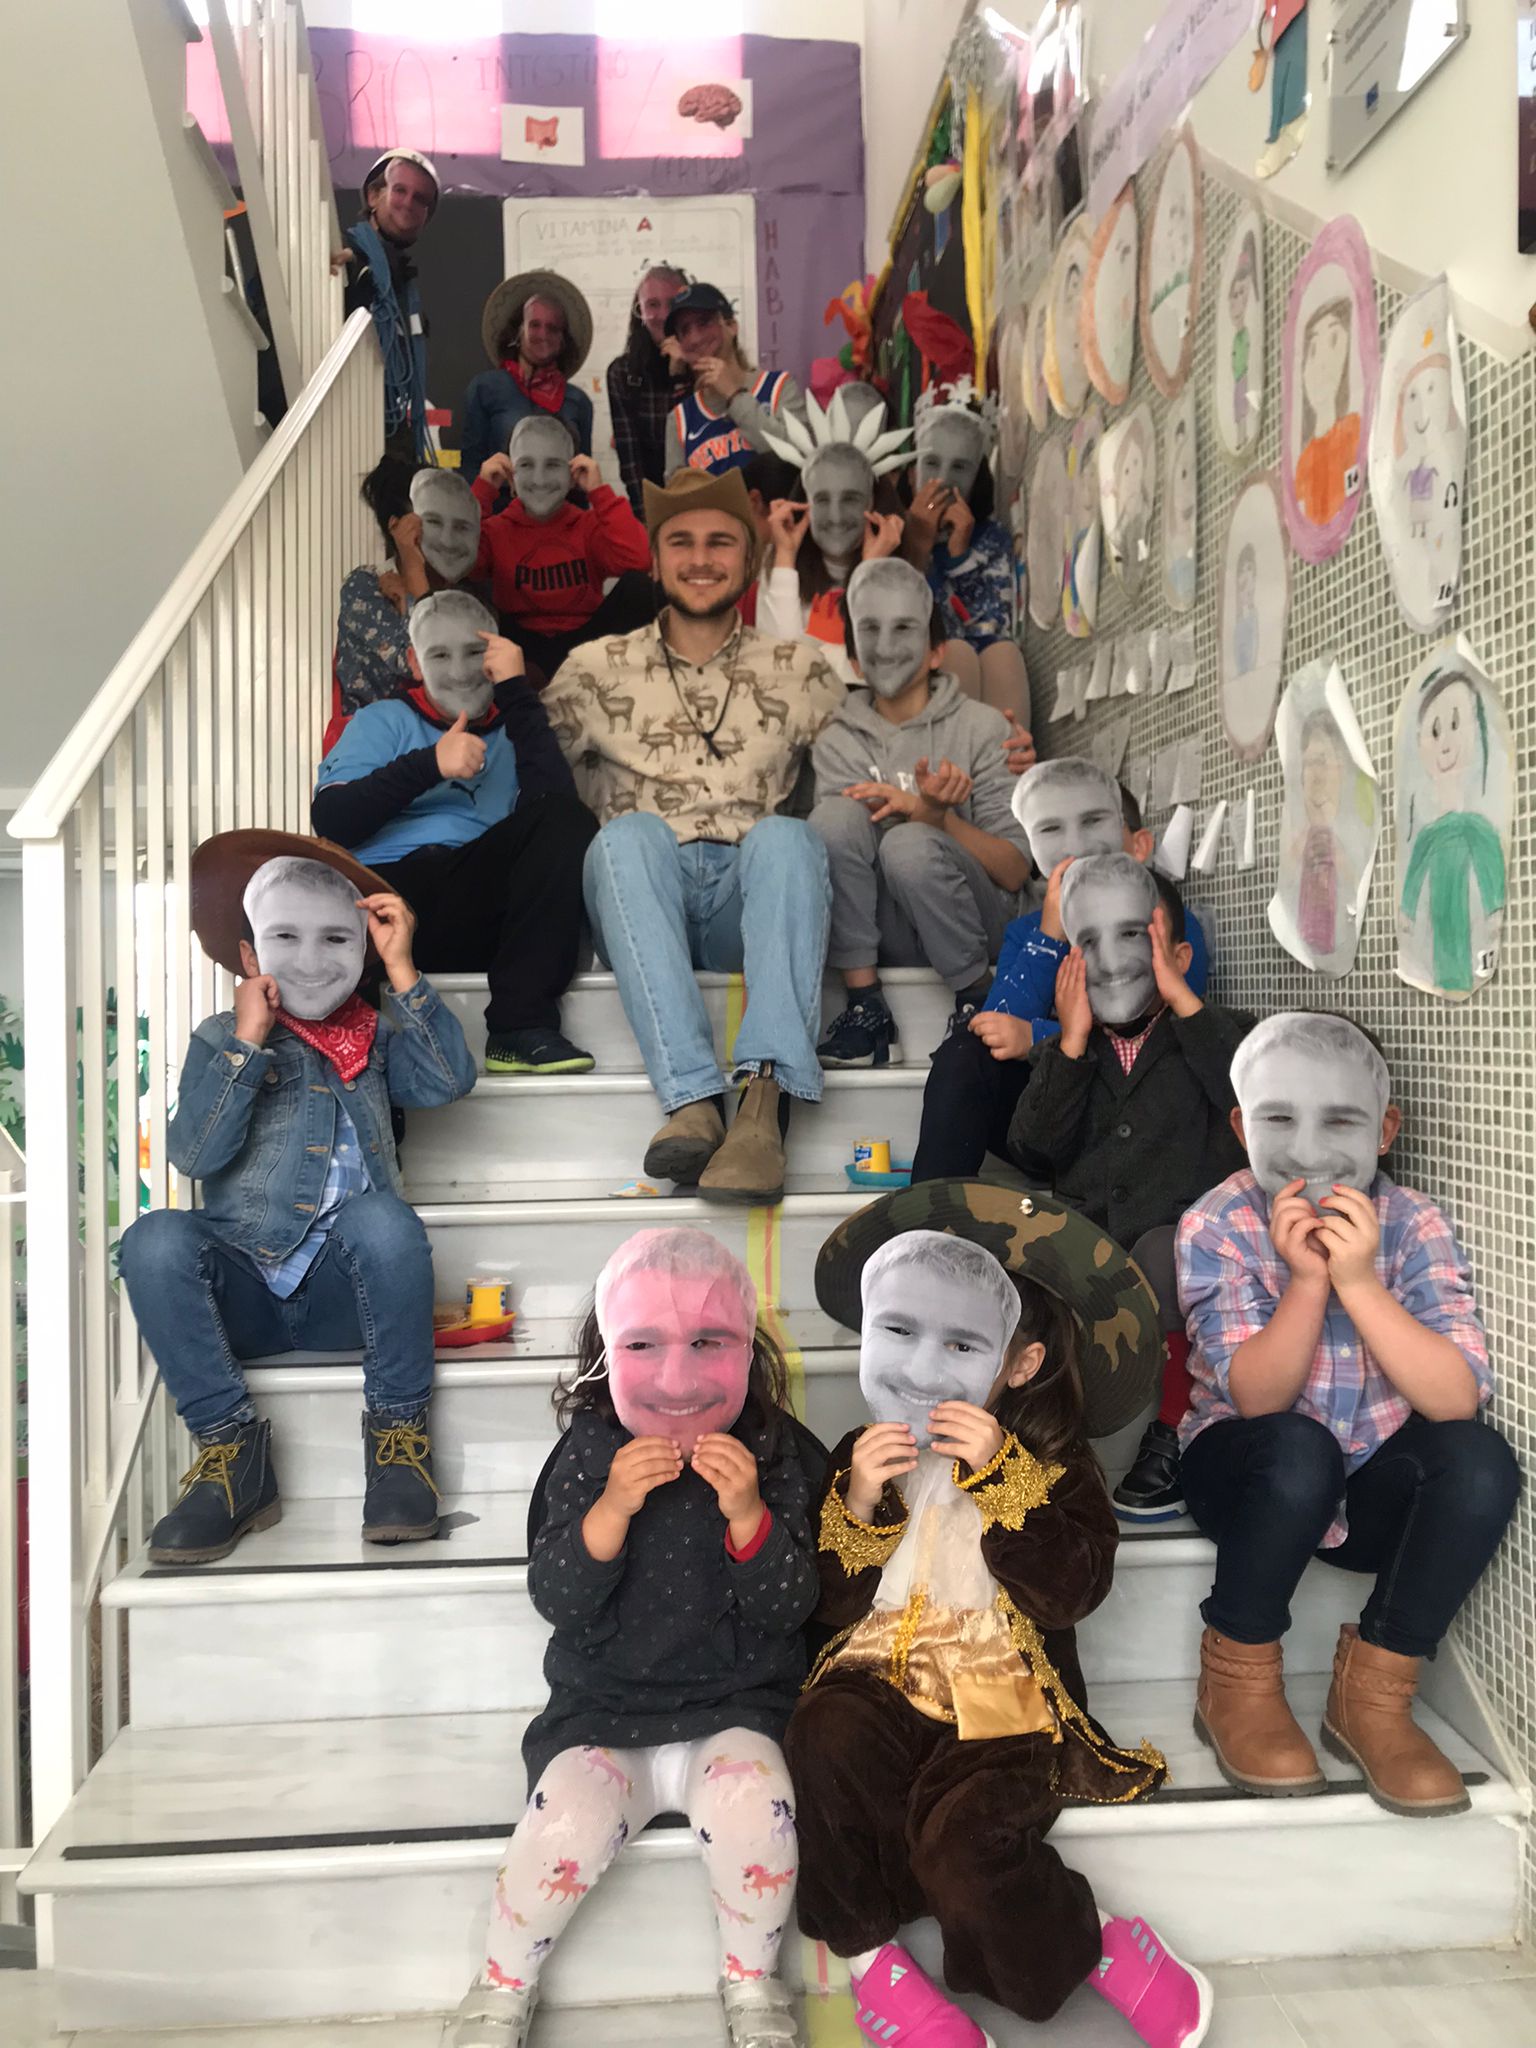 On 'American and British Day,' my Spanish students surprised me with masks of my face!